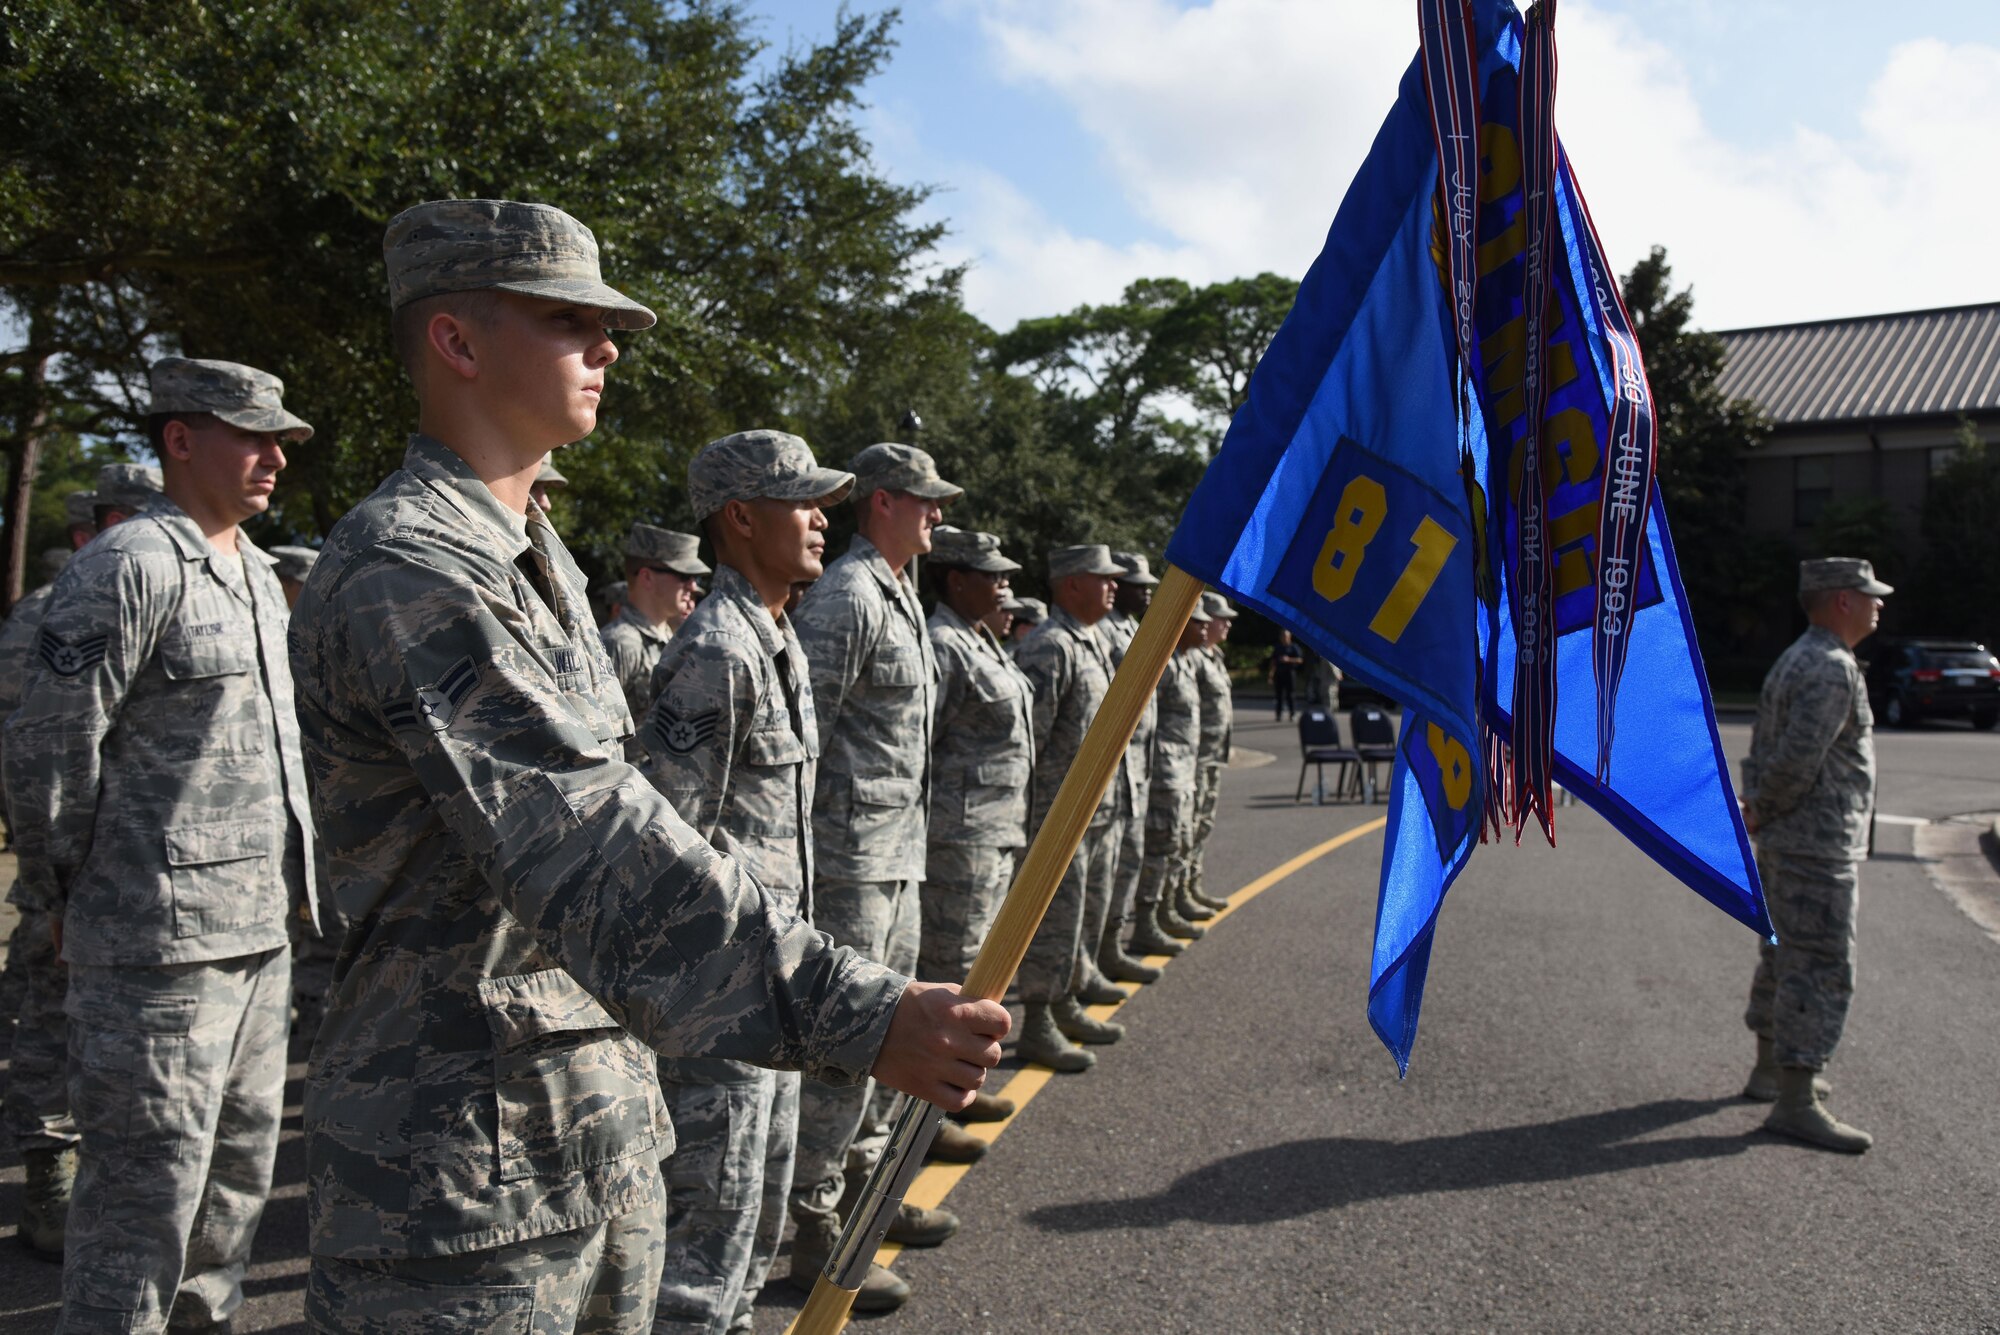 Airman 1st Class Phillip Wilson, 81st Communications Squadron client systems technician, holds the squadron guidon flag during the POW/MIA Retreat Ceremony Sept. 15, 2017, on Keesler Air Force Base, Mississippi. The event, hosted by the Air Force Sergeants Association Chapter 652, was held to raise awareness and pay tribute to all prisoners of war and military members still missing in action. (U.S. Air Force photo by Kemberly Groue)